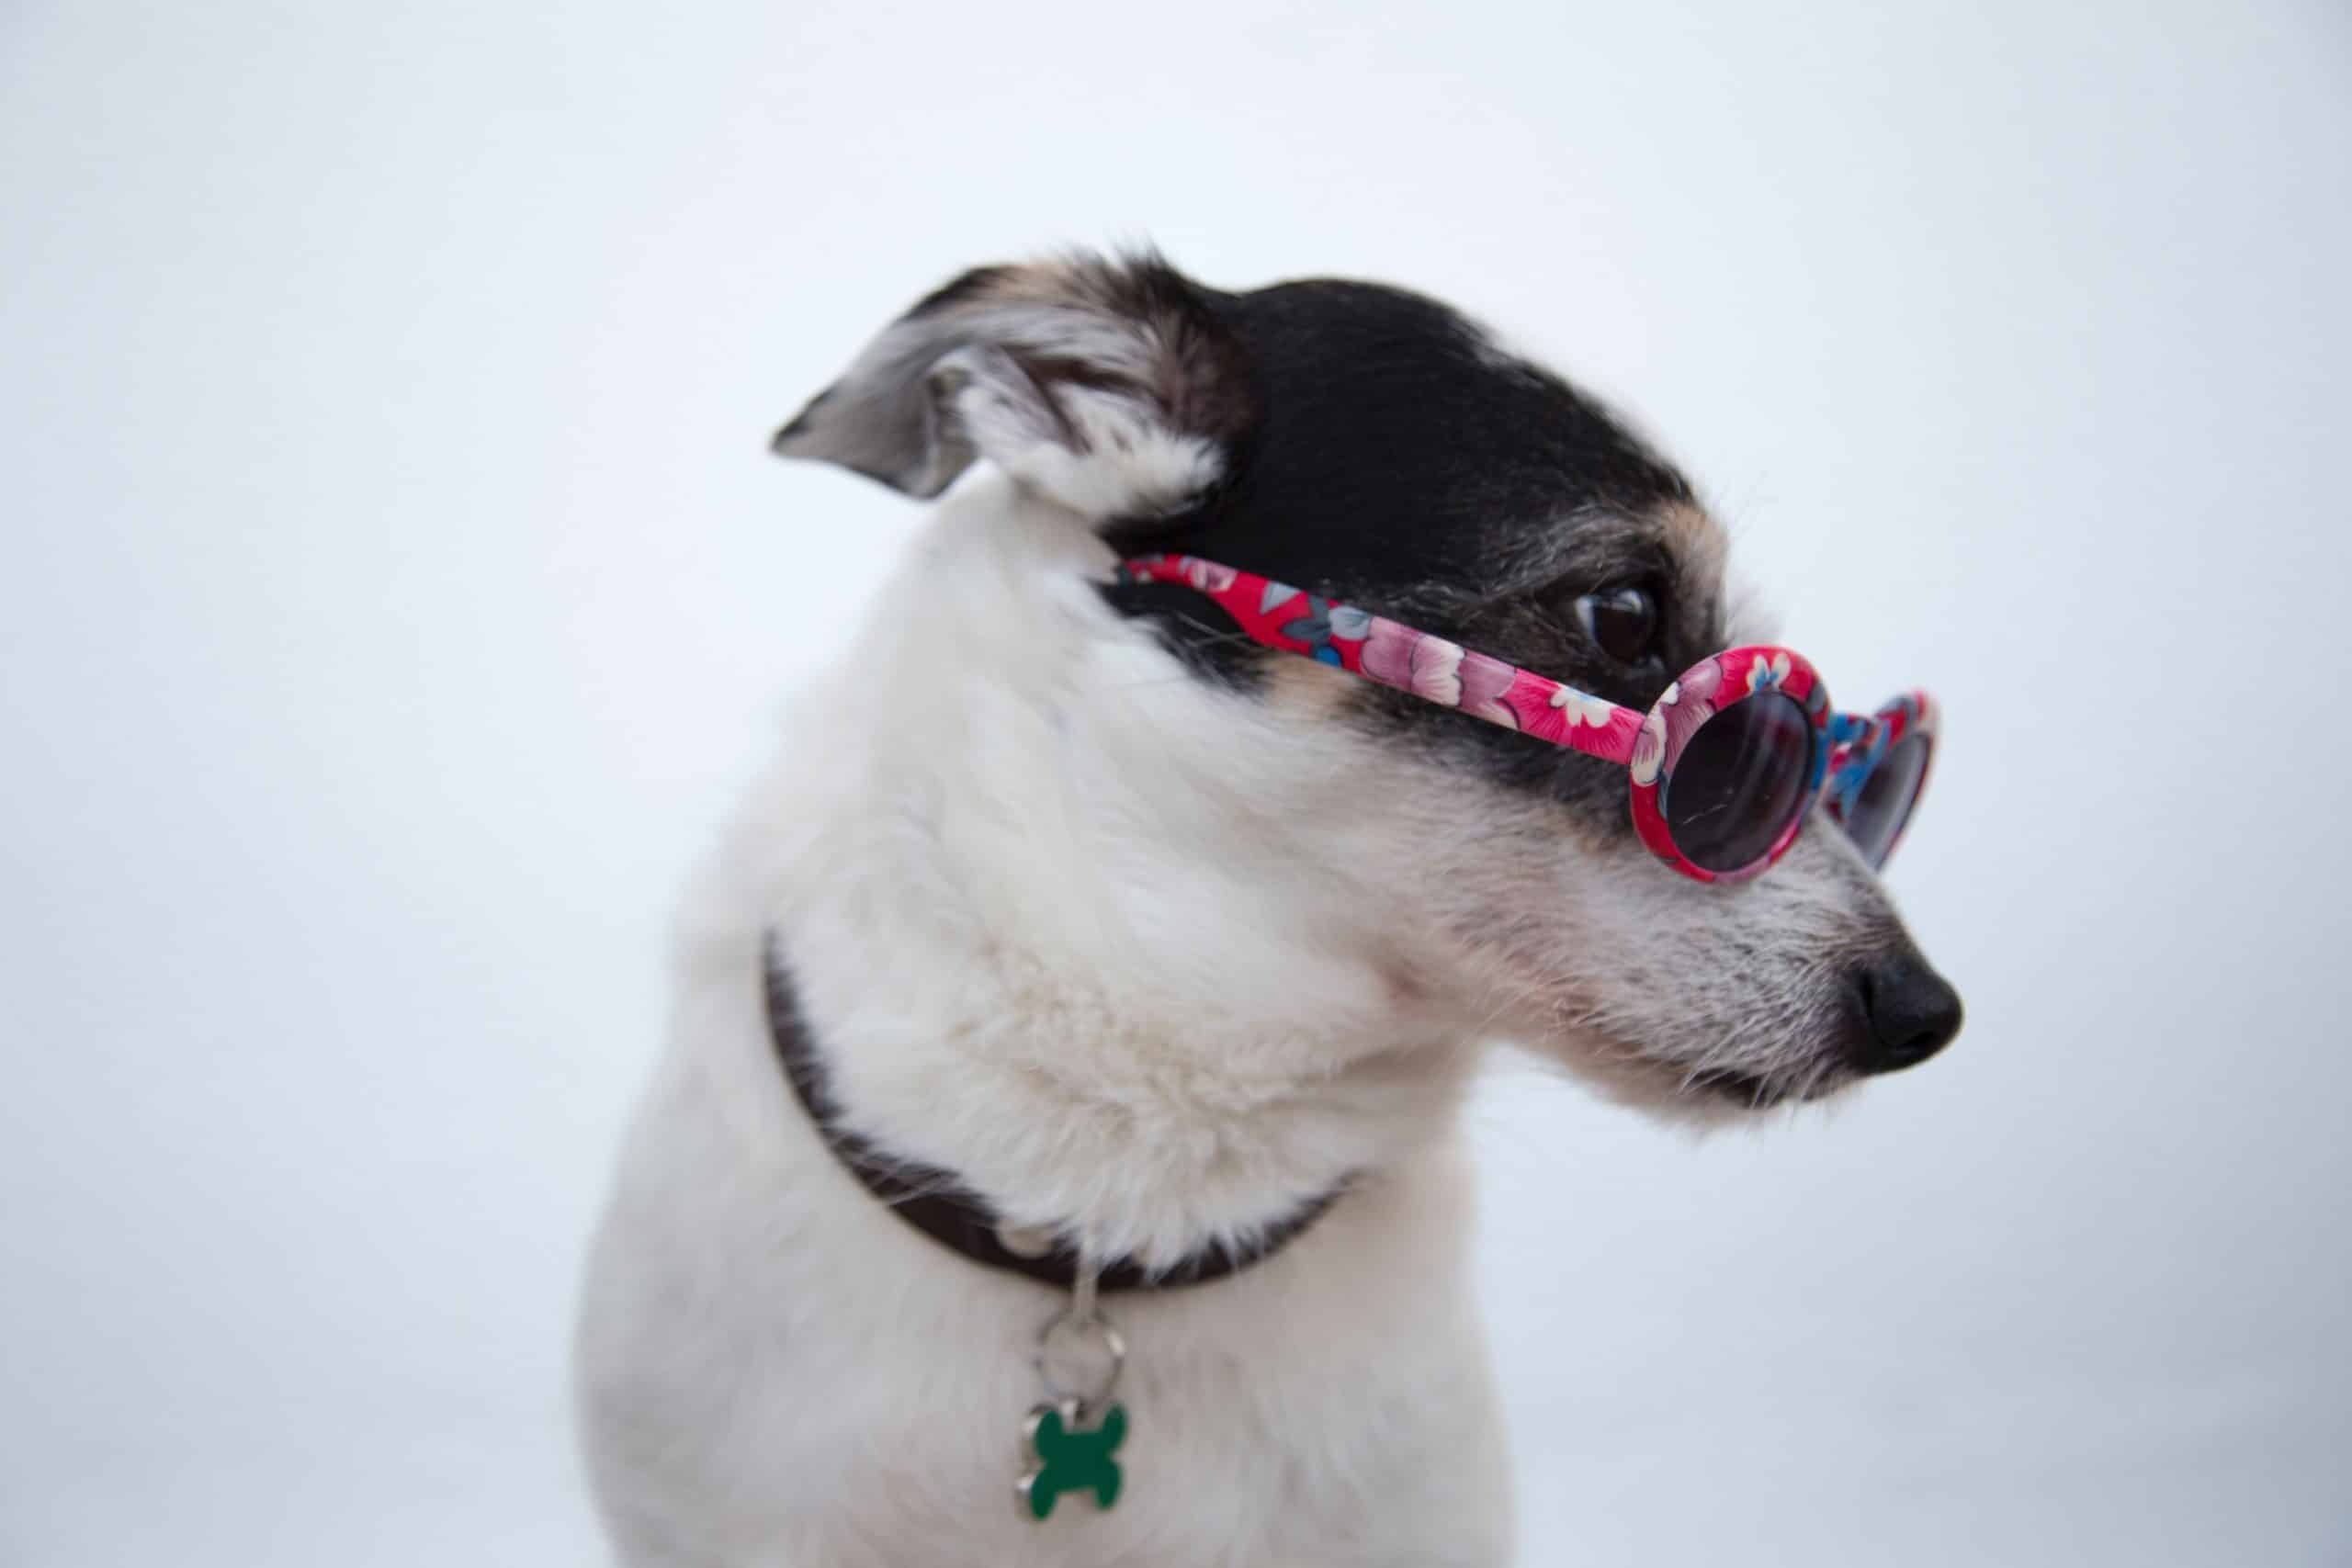 Spoil your pooch with a luxury pet vacation like the one this black and white dog wearings sunglasses is enjoying.